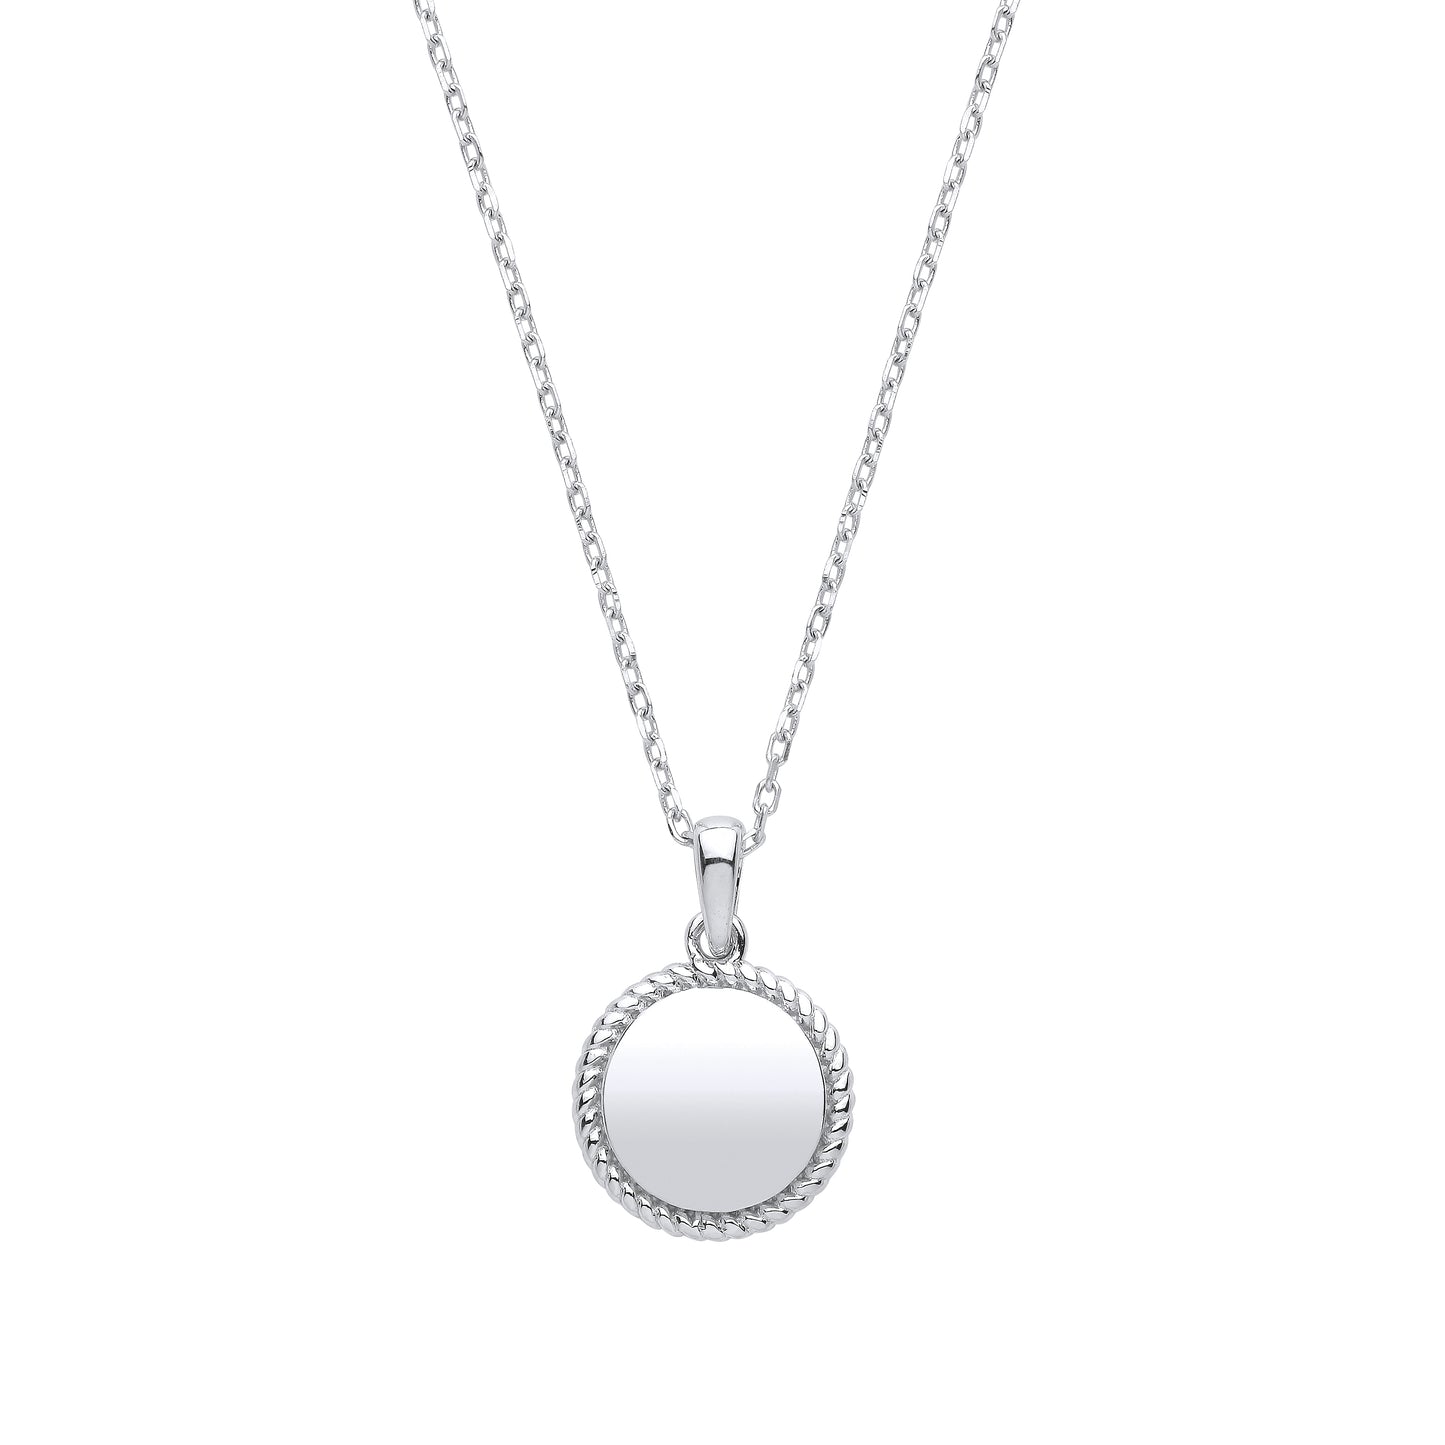 Silver  Round Disc Twisted Rope Frame Mirror Pendant Necklace - GVK370